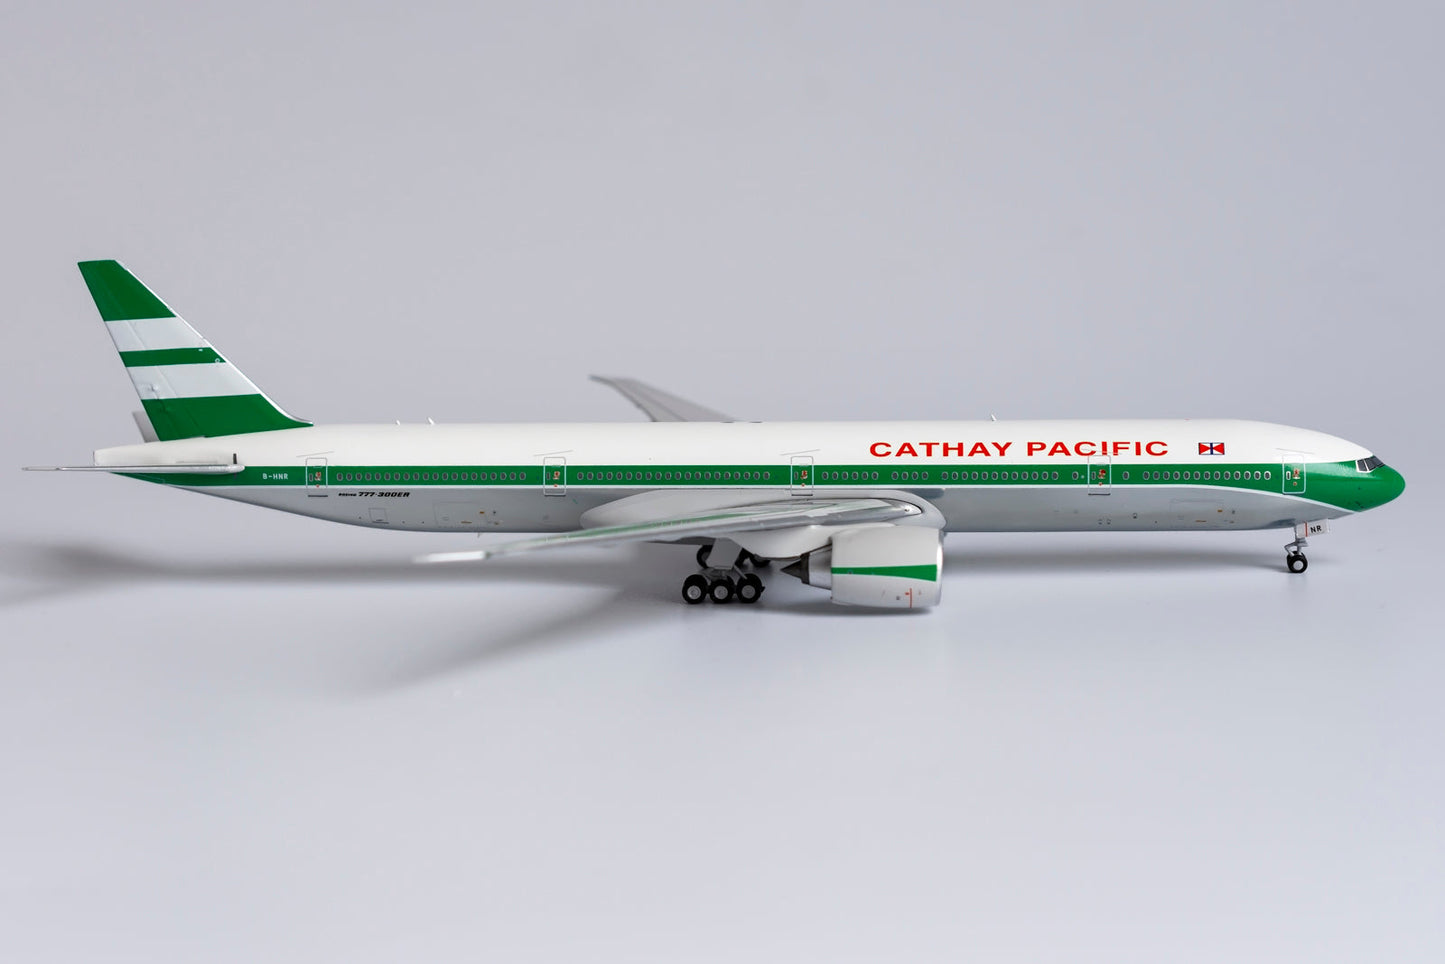 1/400 Cathay Pacific B 777-300ER "Fantasy Retro Livery" NG Models 73001s/d1 *Defective model*